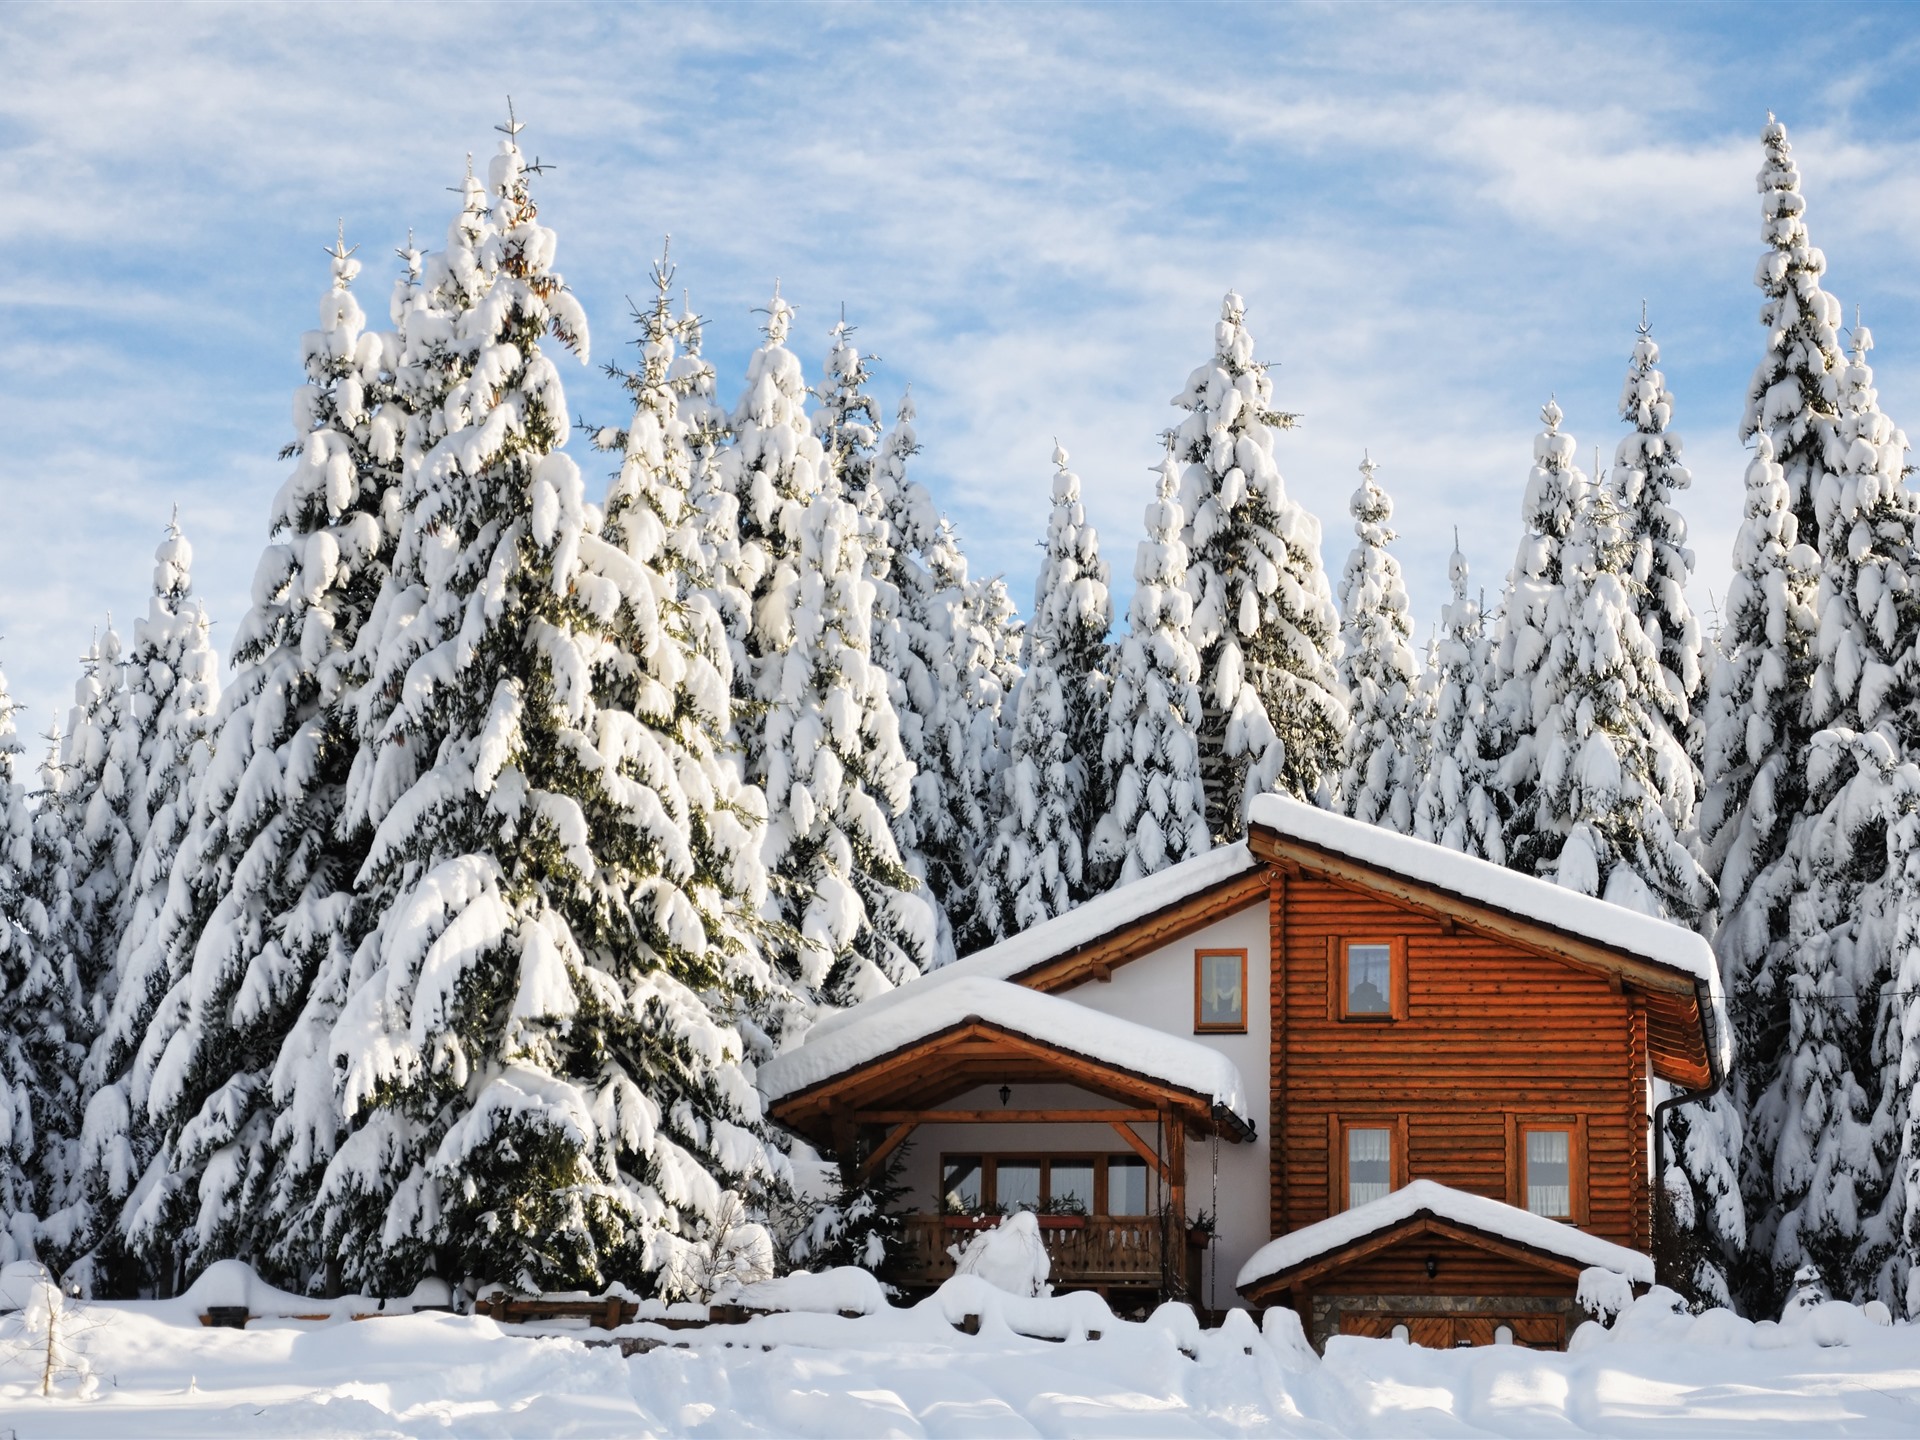 Wallpaper Winter, wood house, thick snow, trees 3840x2160 UHD 4K Picture, Image